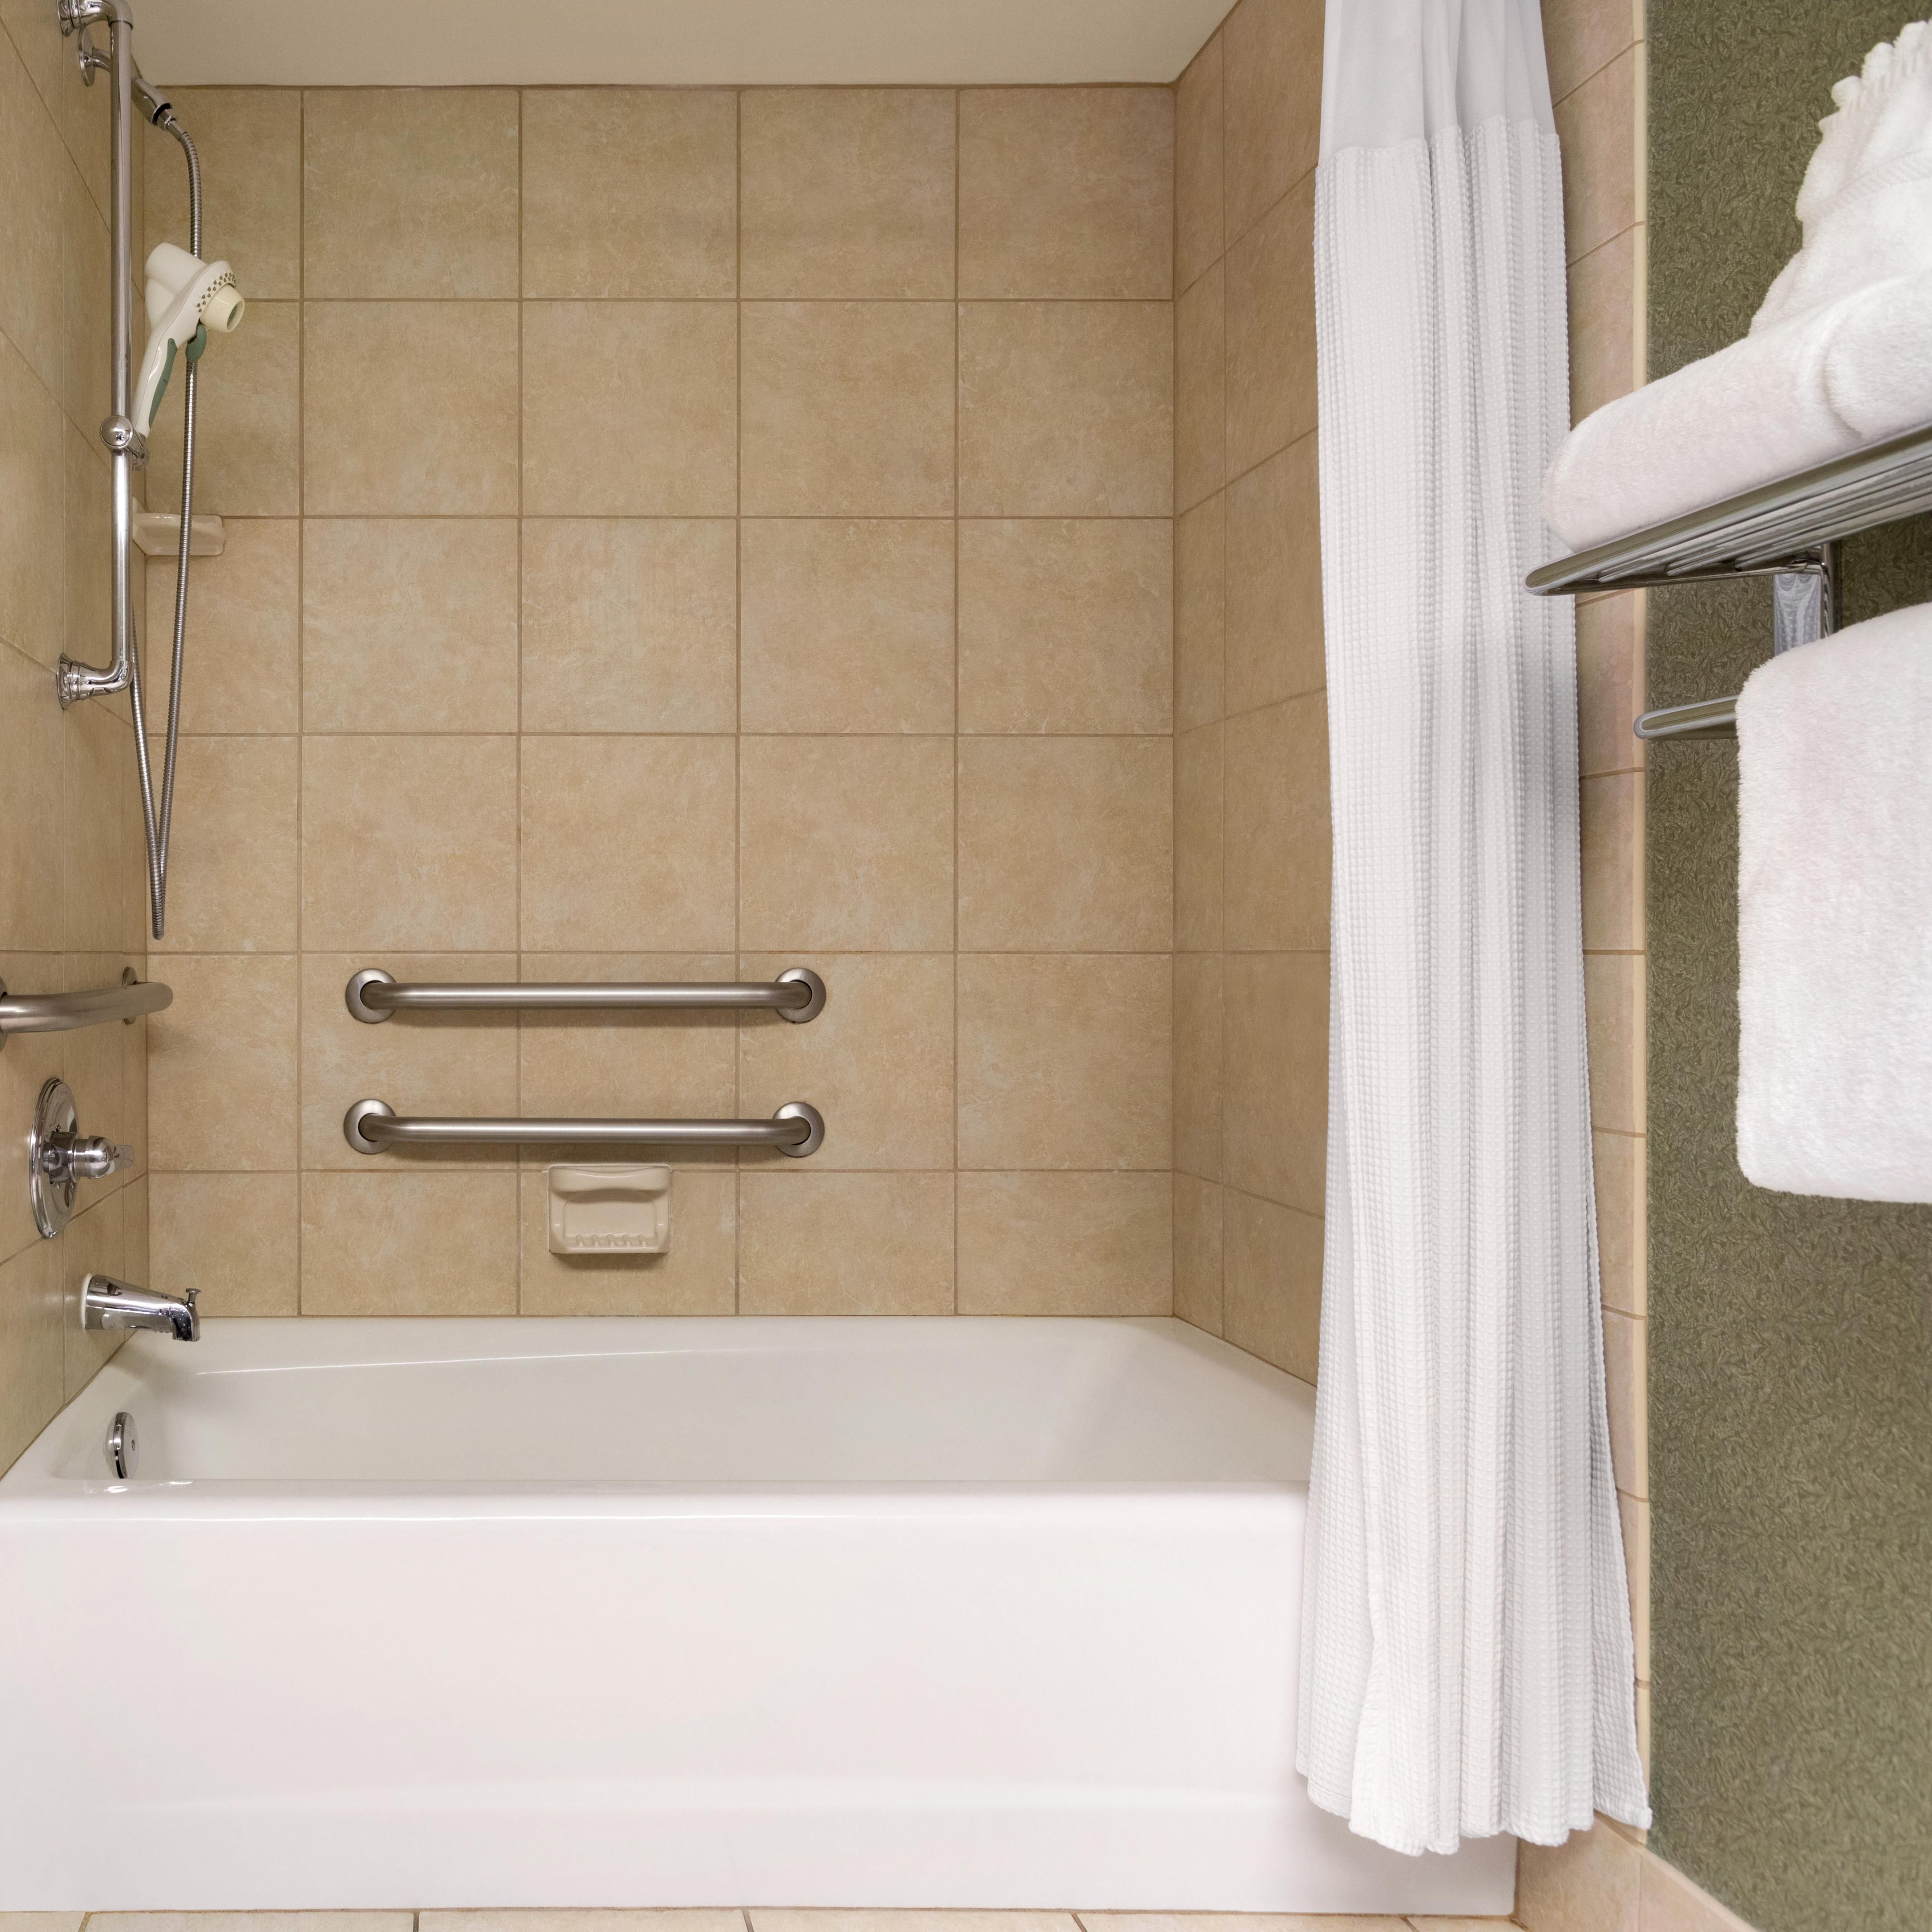 Guest rooms are available with accessible bathroom amenities.